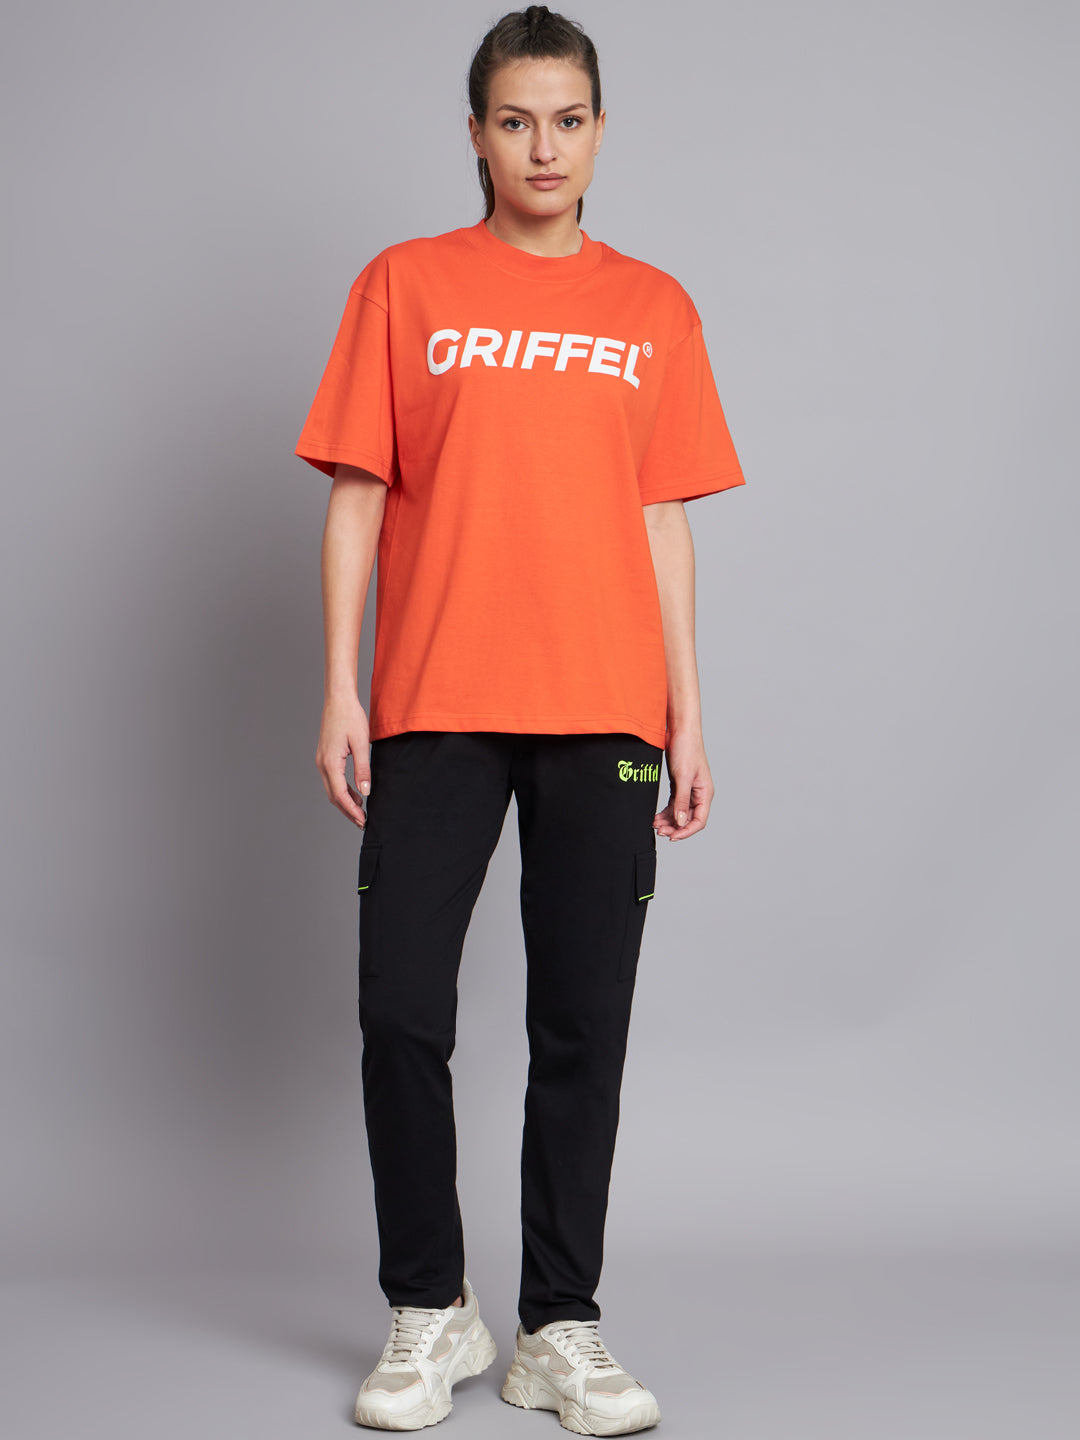 GRIFFEL Women Neon Orange Printed Oversized Loose fit T-shirt and Trackpant Set